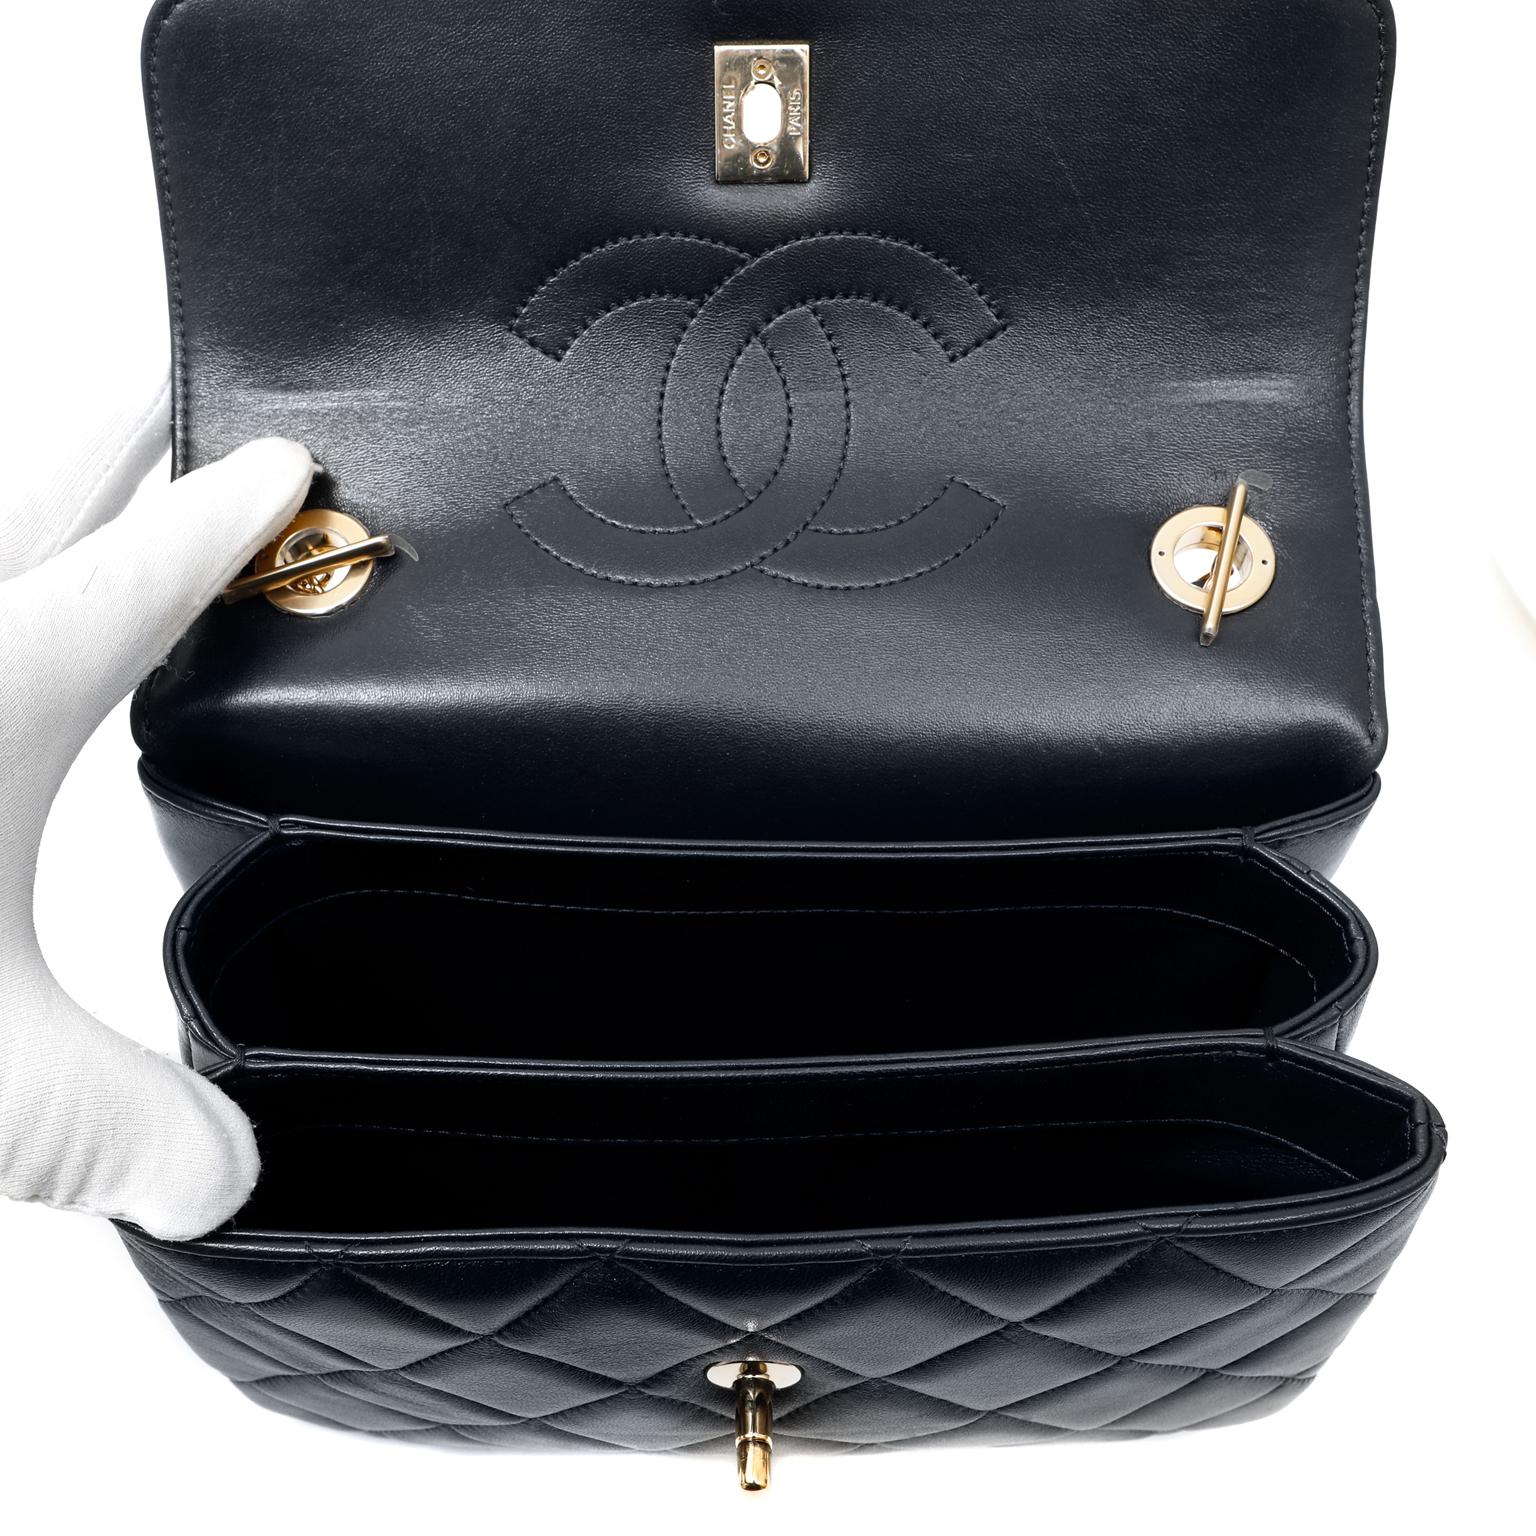 Chanel Navy Leather Top Handle Bag 2